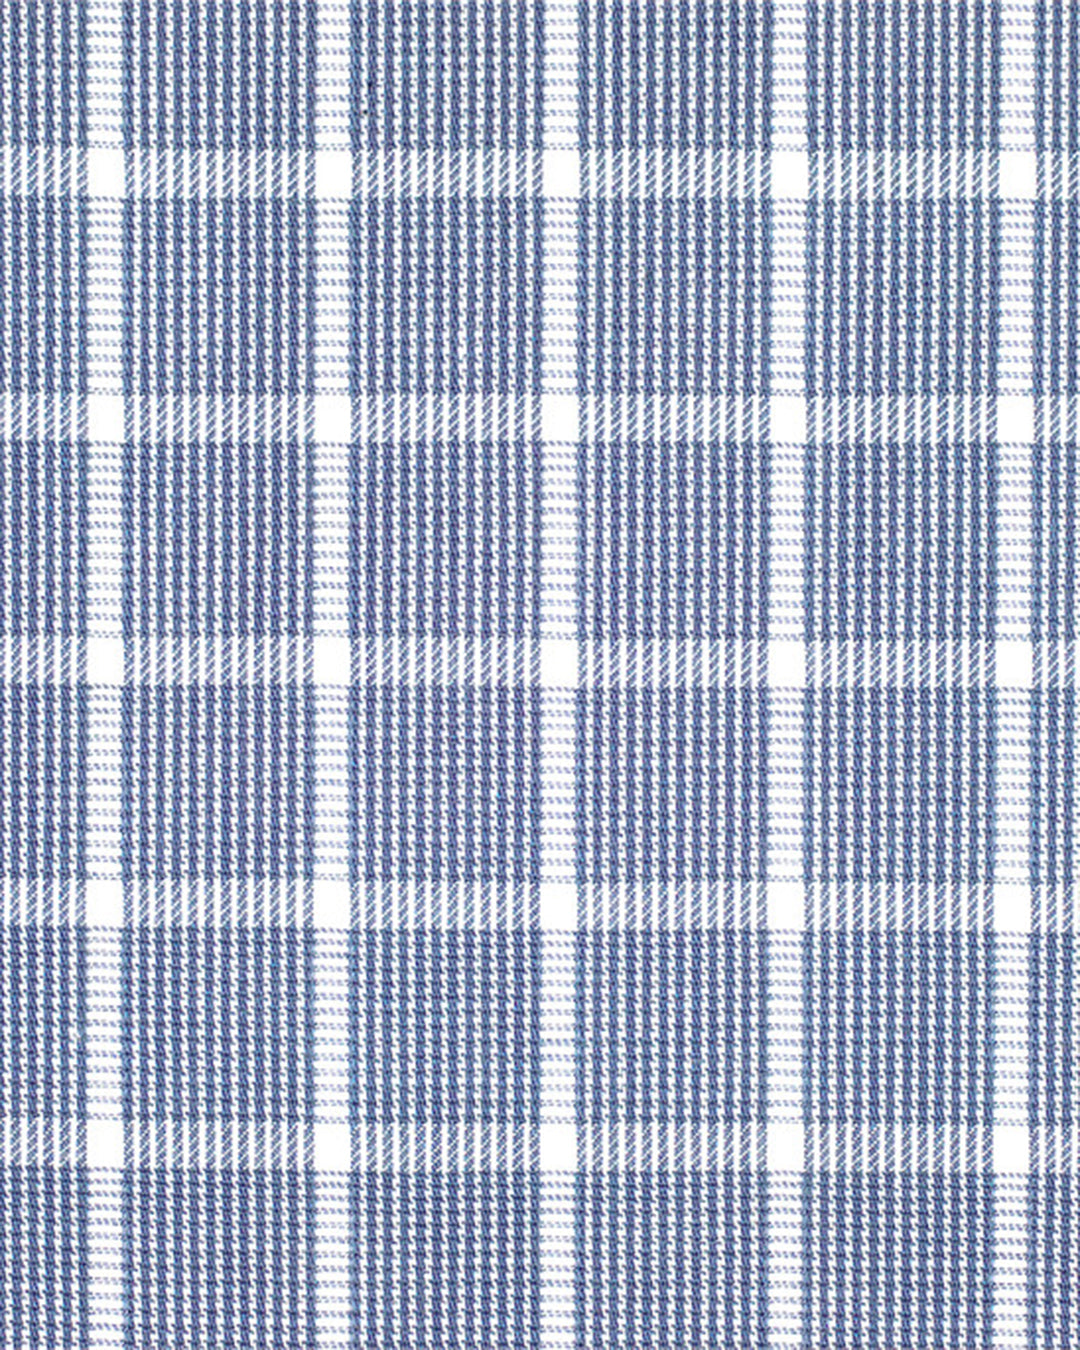 Closeup view of custom check shirts for men by Luxire in navy blue white grid 2